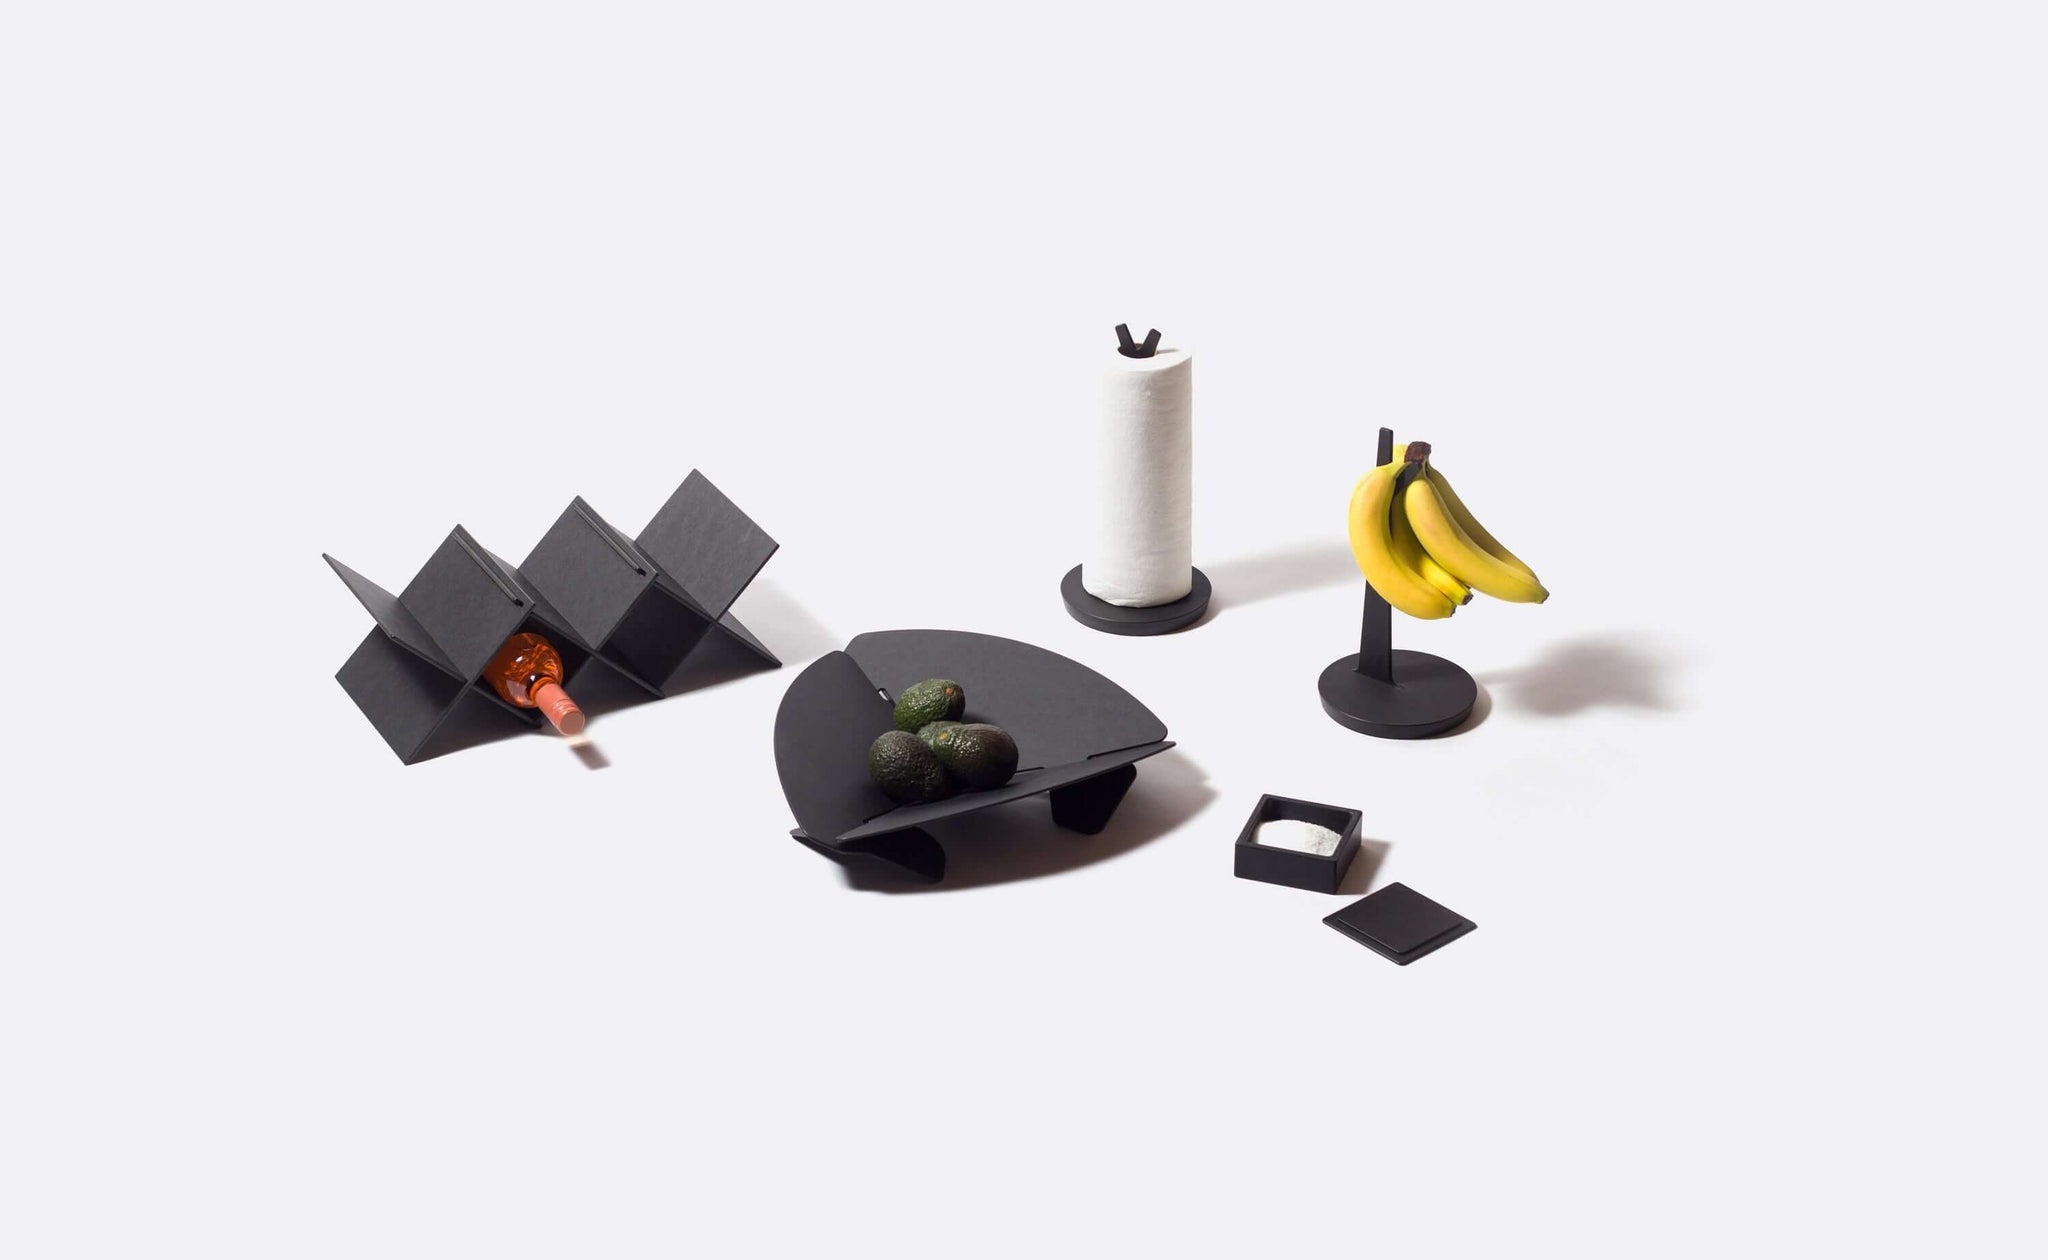 The Countertop series features collectively on a white background. Including Wine rack, Paper Towel Holder, Banana Holder, Salt Cellar, and Collapsible Handy Bowl in Slate Color. 